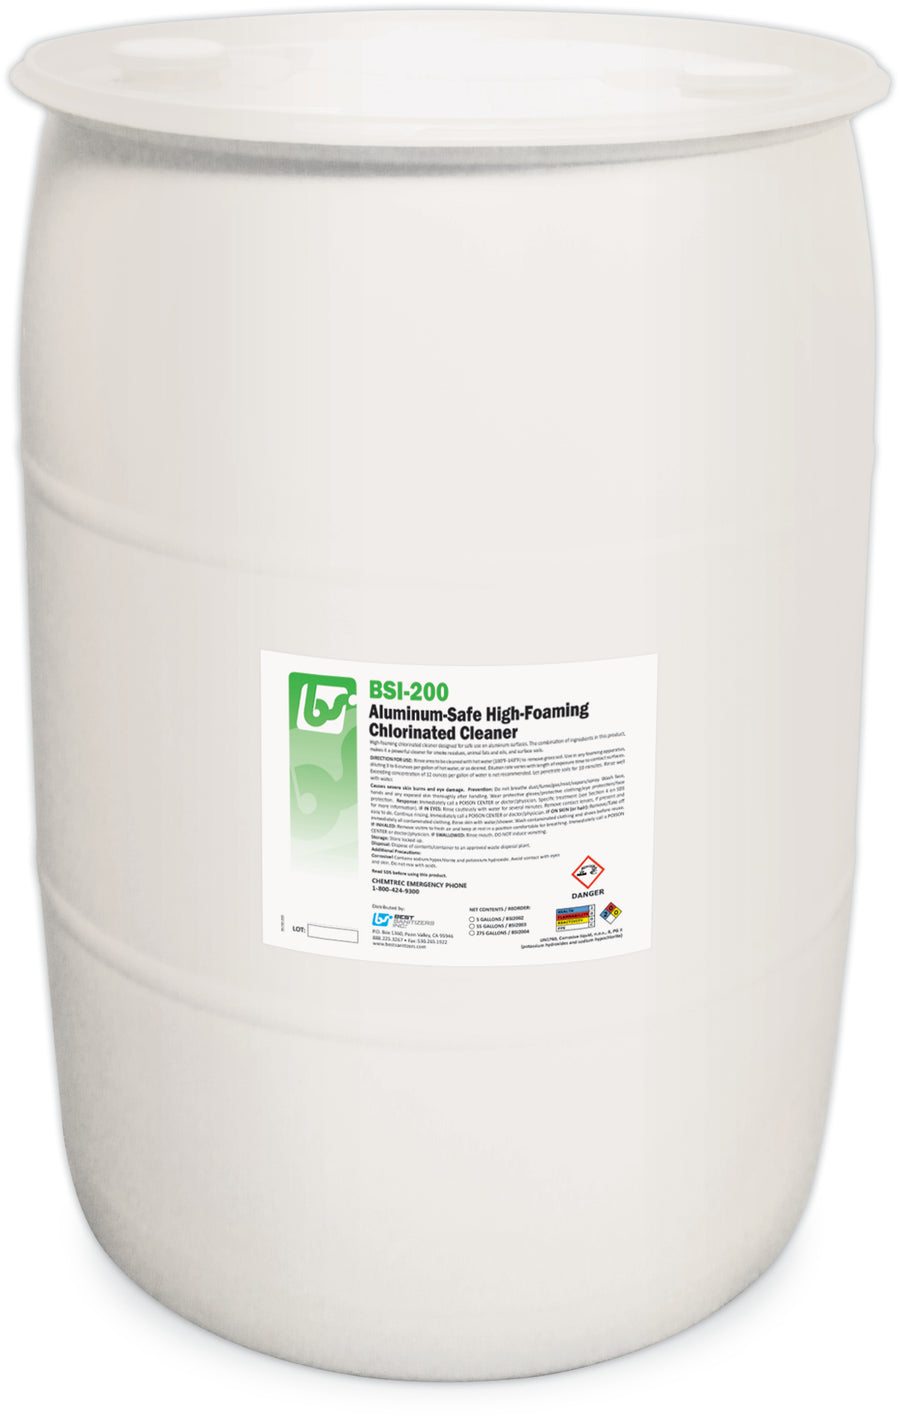 A 55 Gallon Drum of BSI-200 Aluminum-Safe High-Foaming Chlorinated Cleaner.